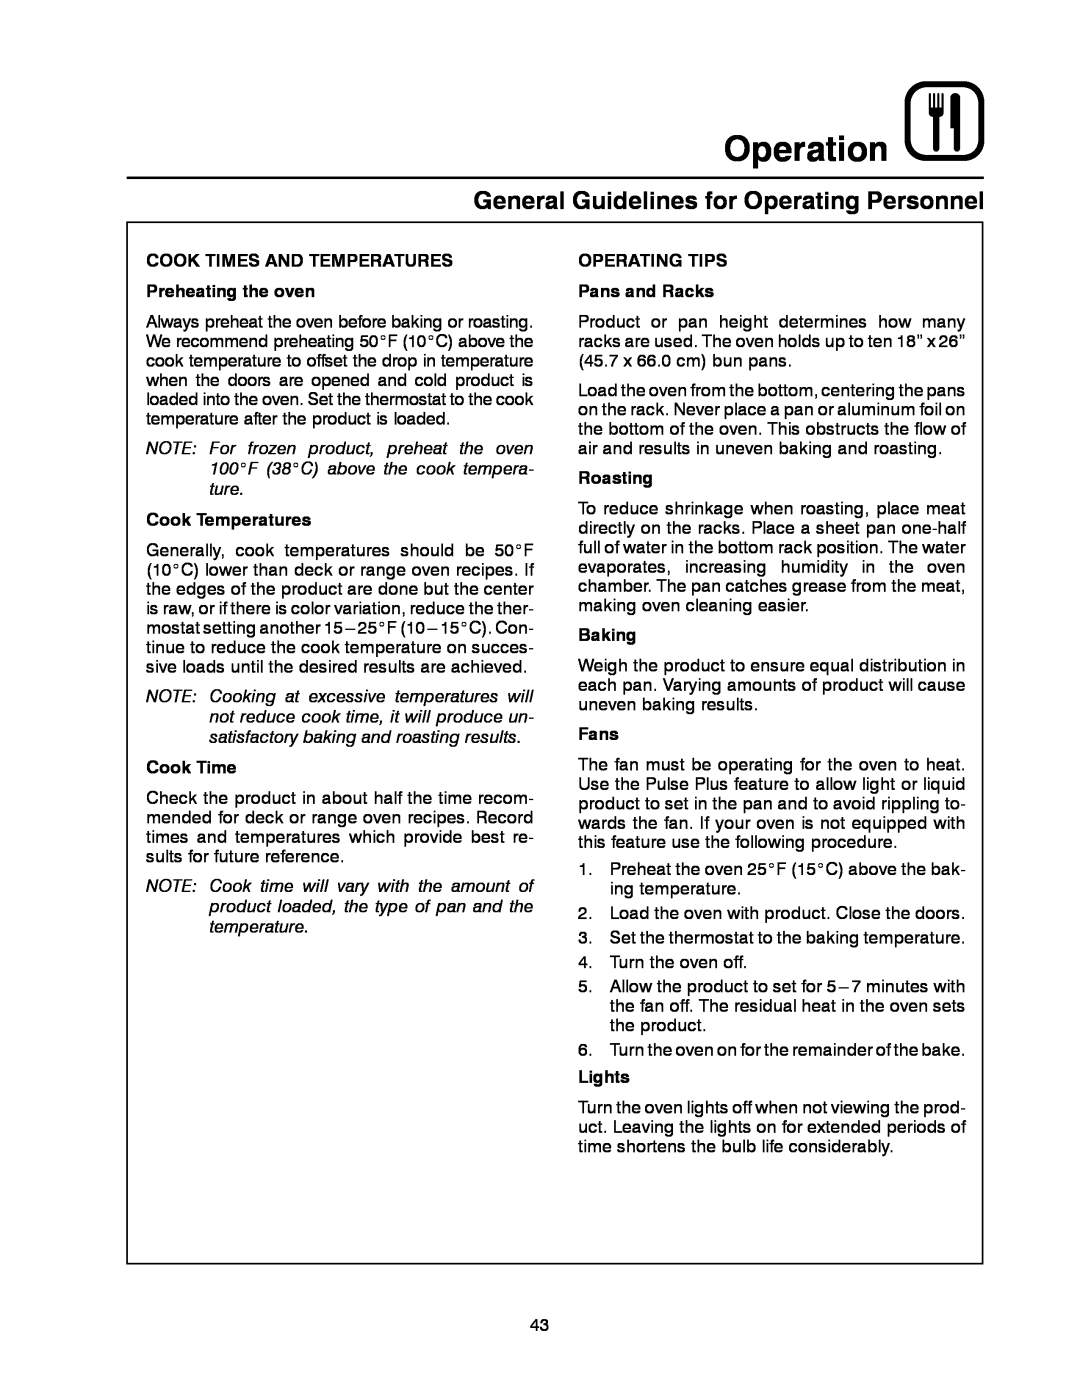 Blodgett DFG-100 General Guidelines for Operating Personnel, Operation, COOK TIMES AND TEMPERATURES Preheating the oven 